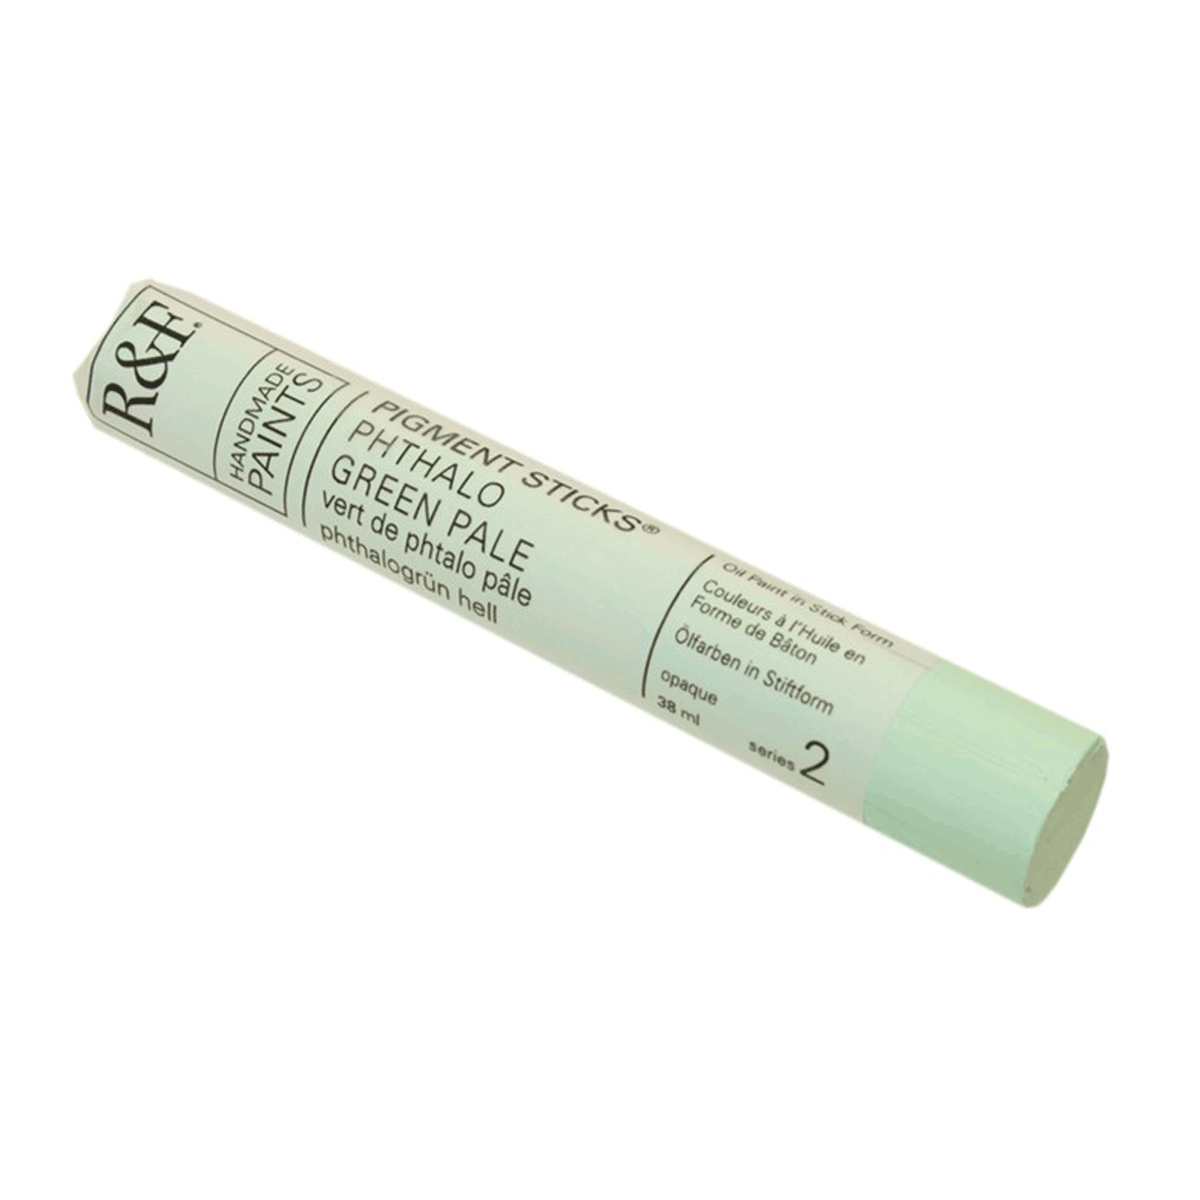 R&F Oil Pigment Stick, Phthalo Green Pale 38ml